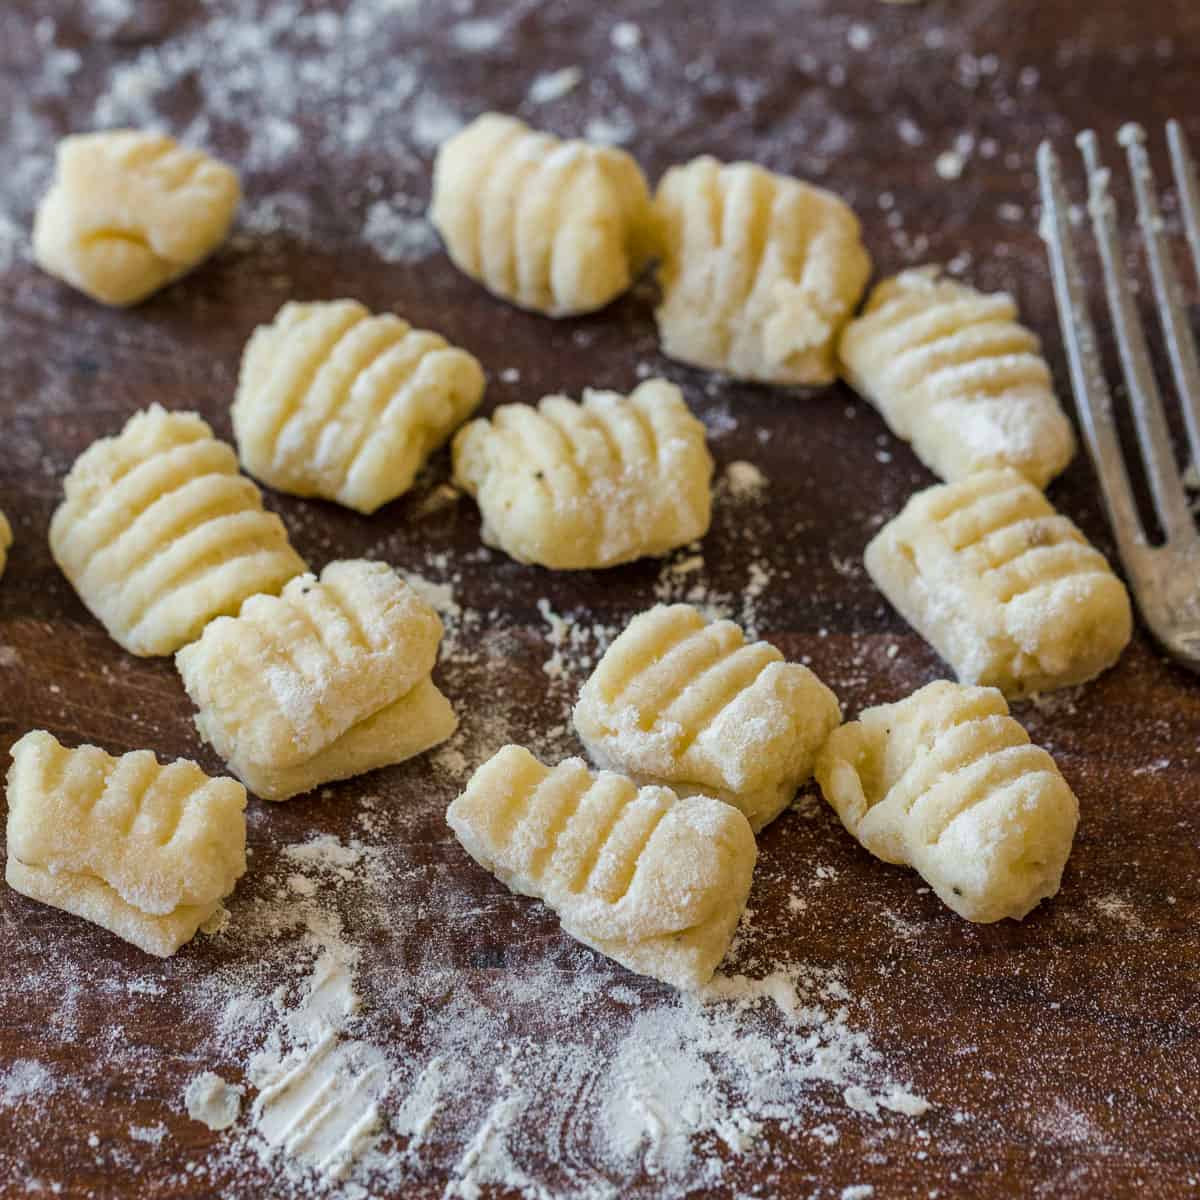 Italian Date Night: Hand-rolled Gnocchi Cooking Class